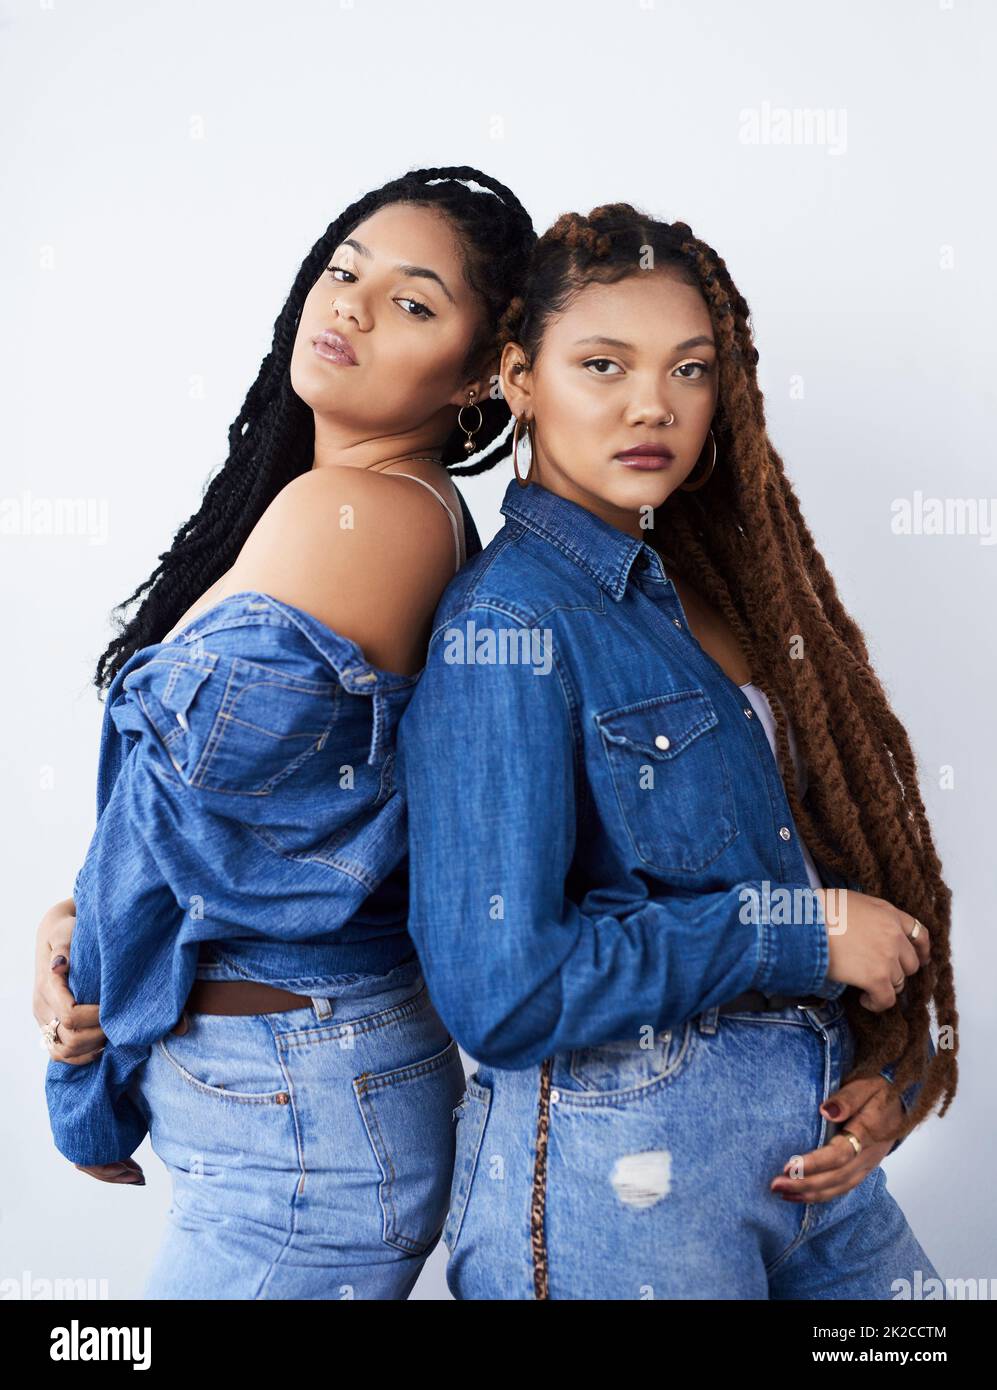 Looking funky and fresh. Studio shot of two beautiful young women posing against a grey background. Stock Photo